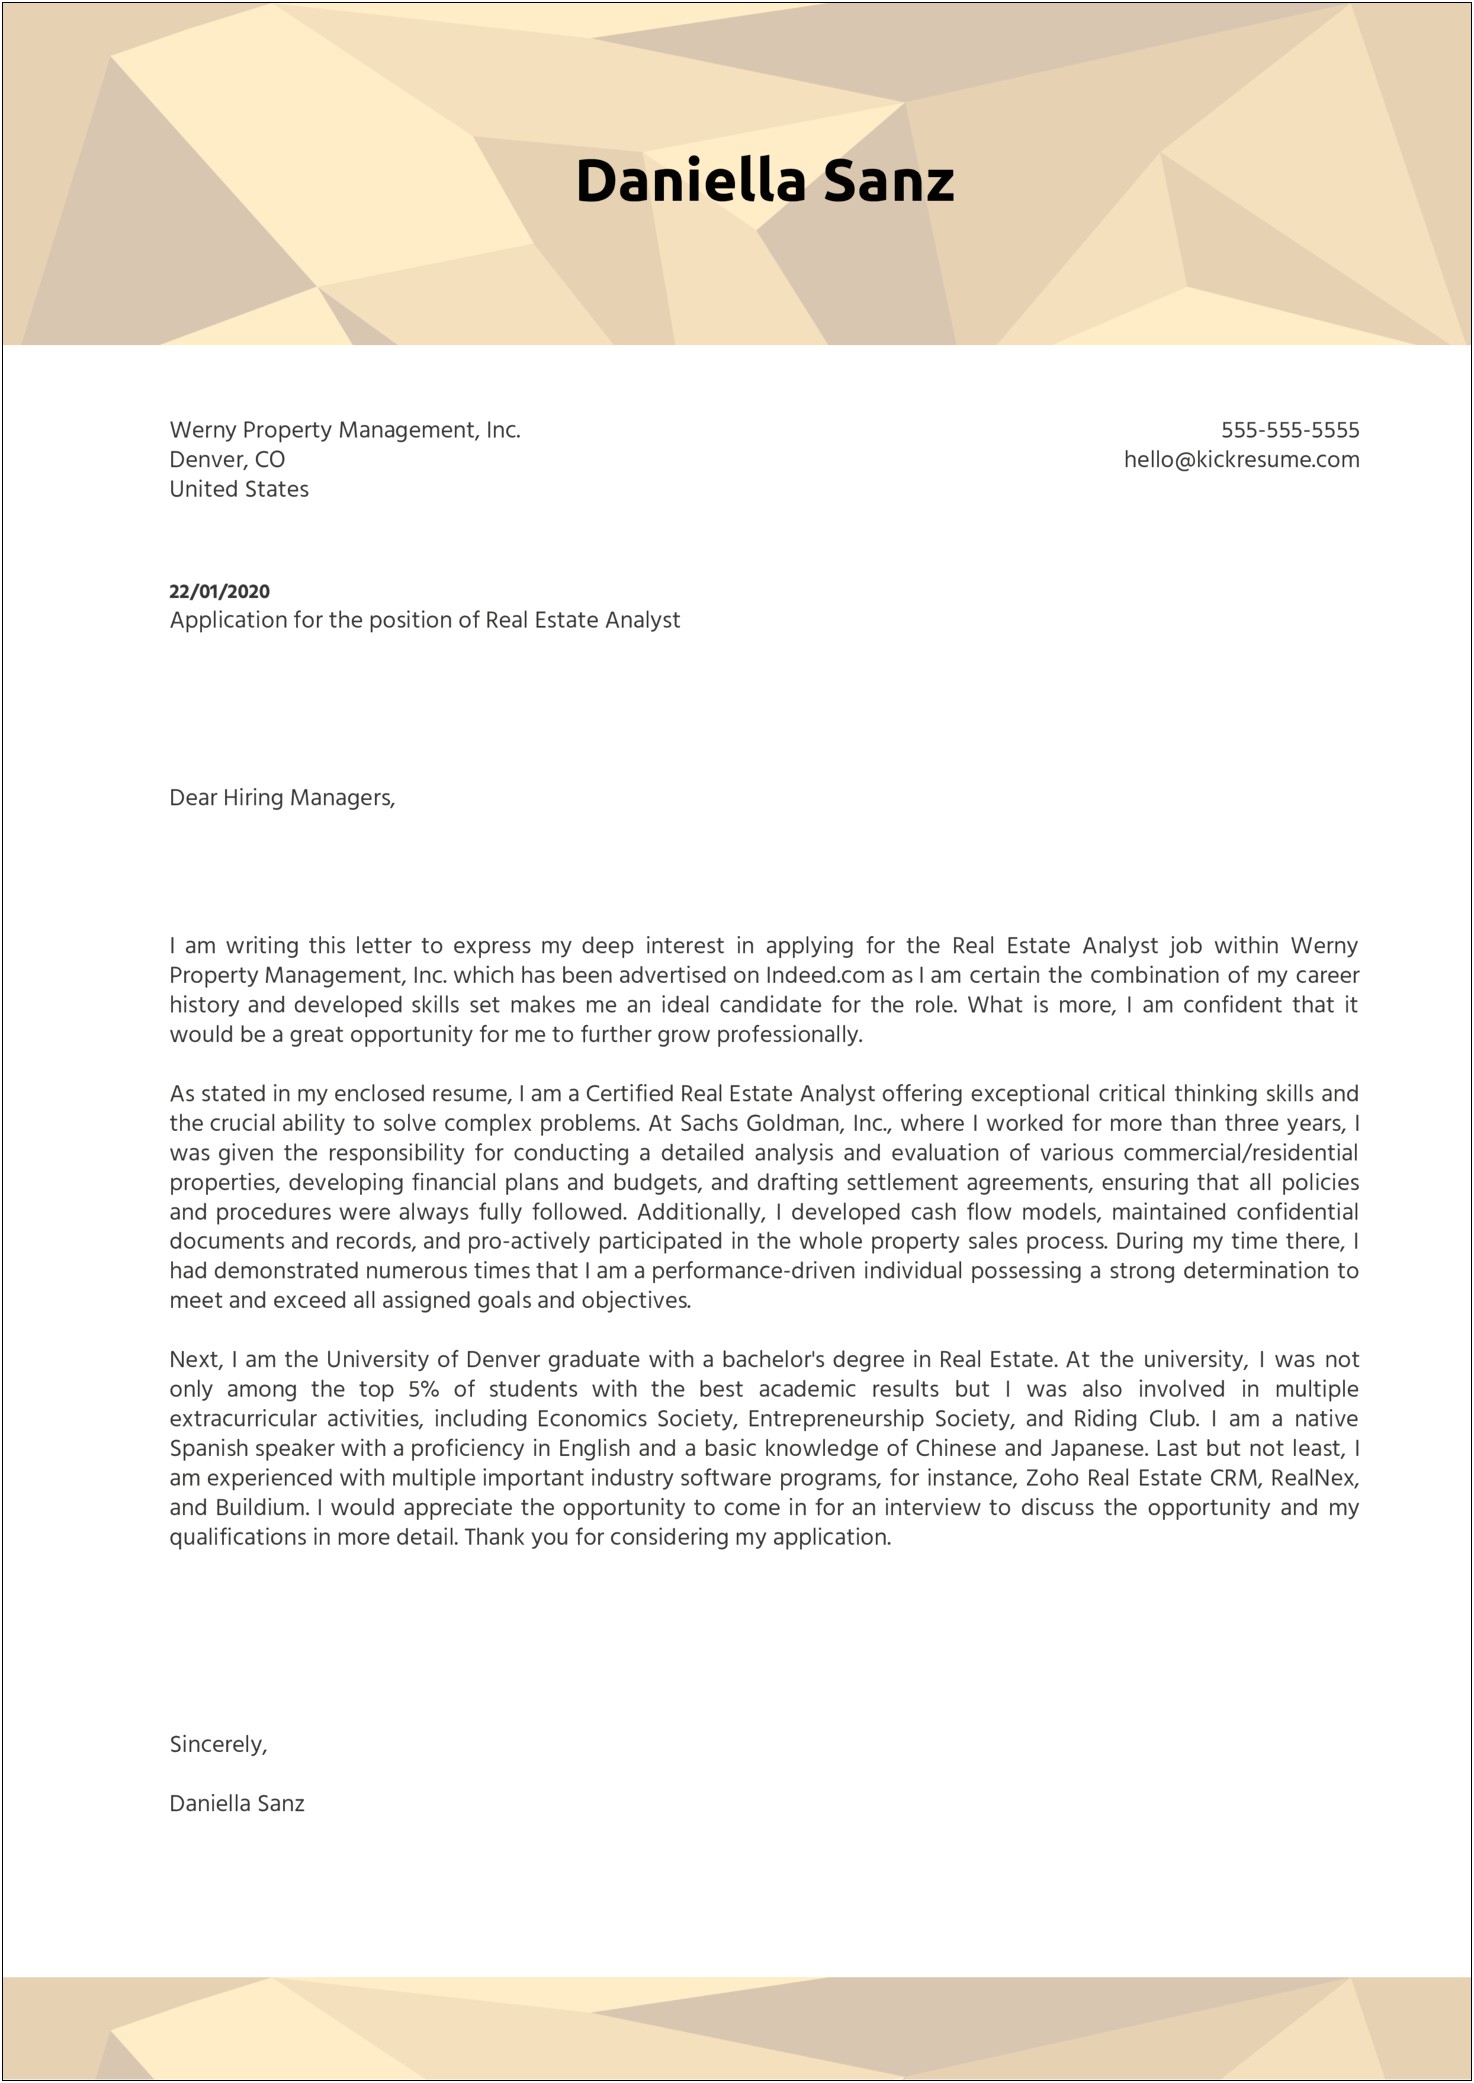 Sample Resume And Cover Letter For Property Manager